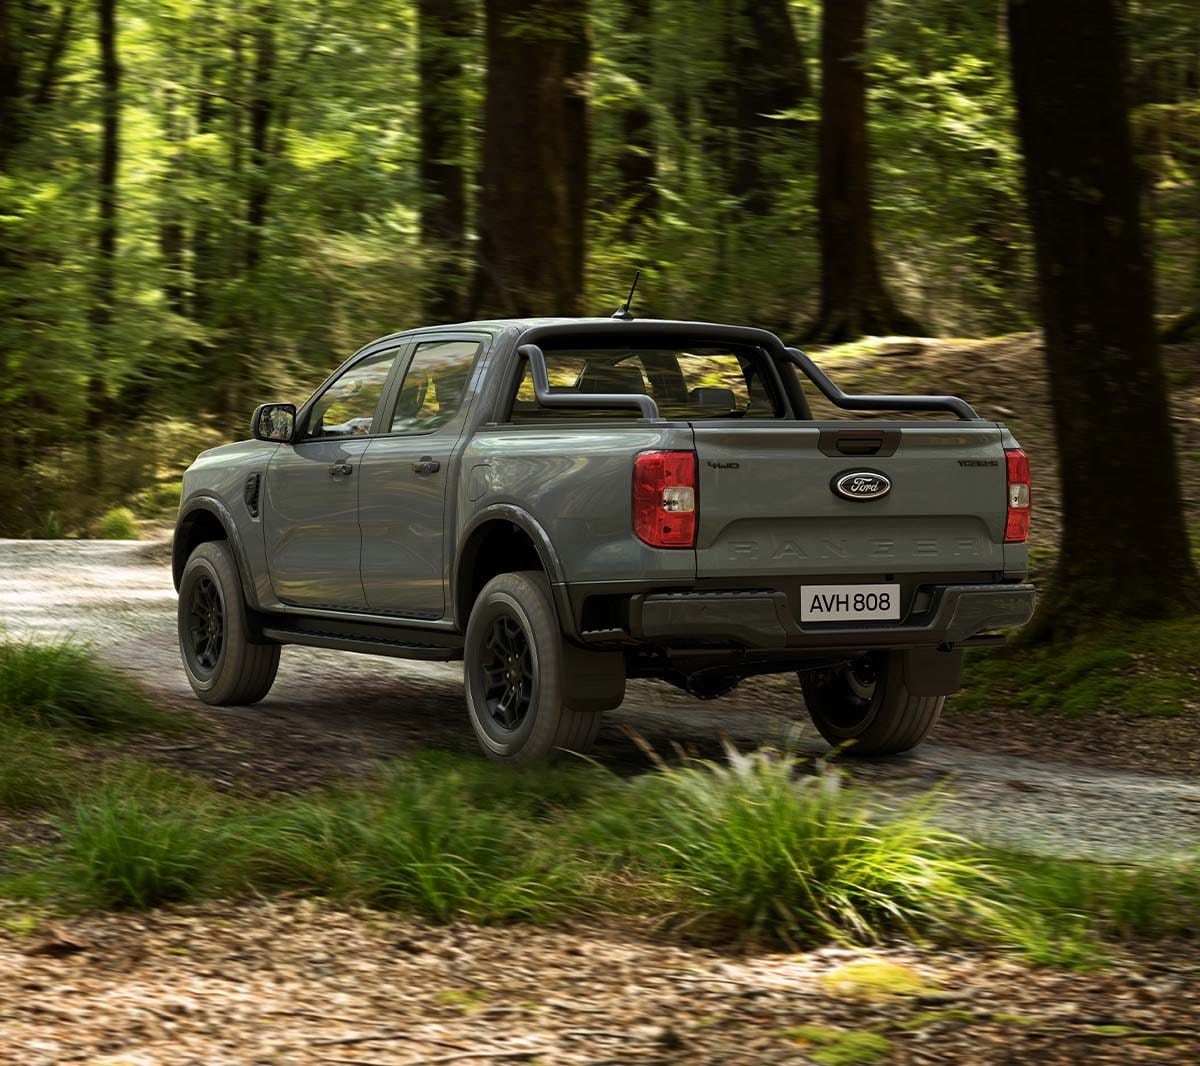 All-New Ranger Tremor driving in forest rear view